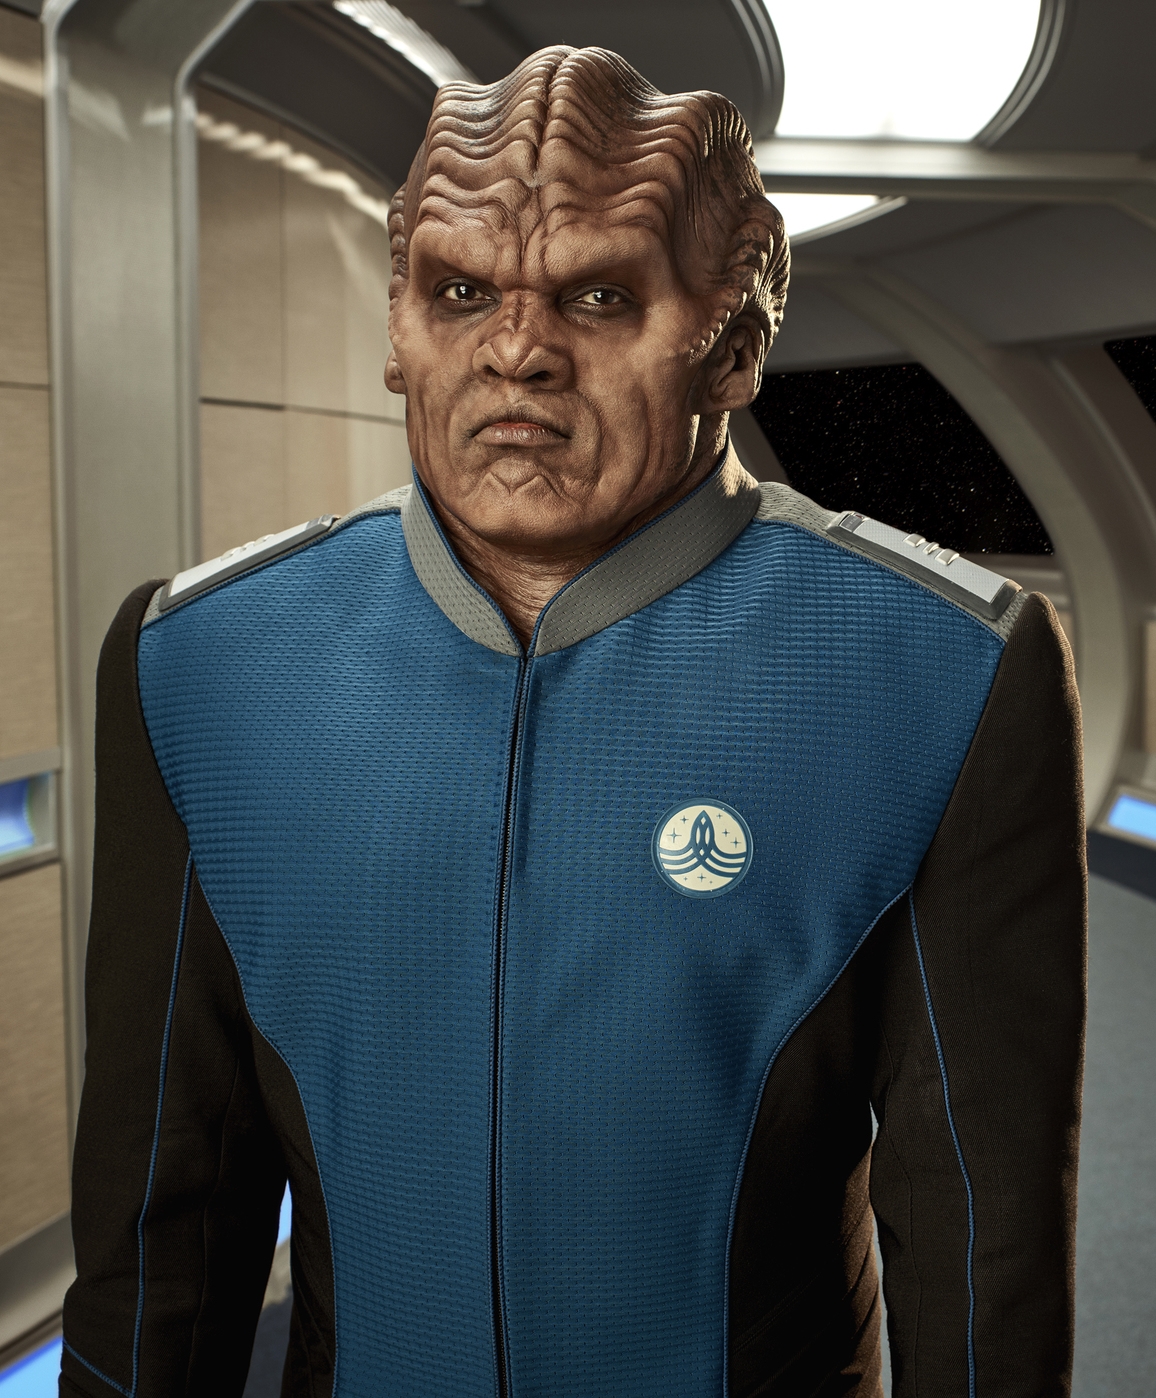 star trek characters in the orville